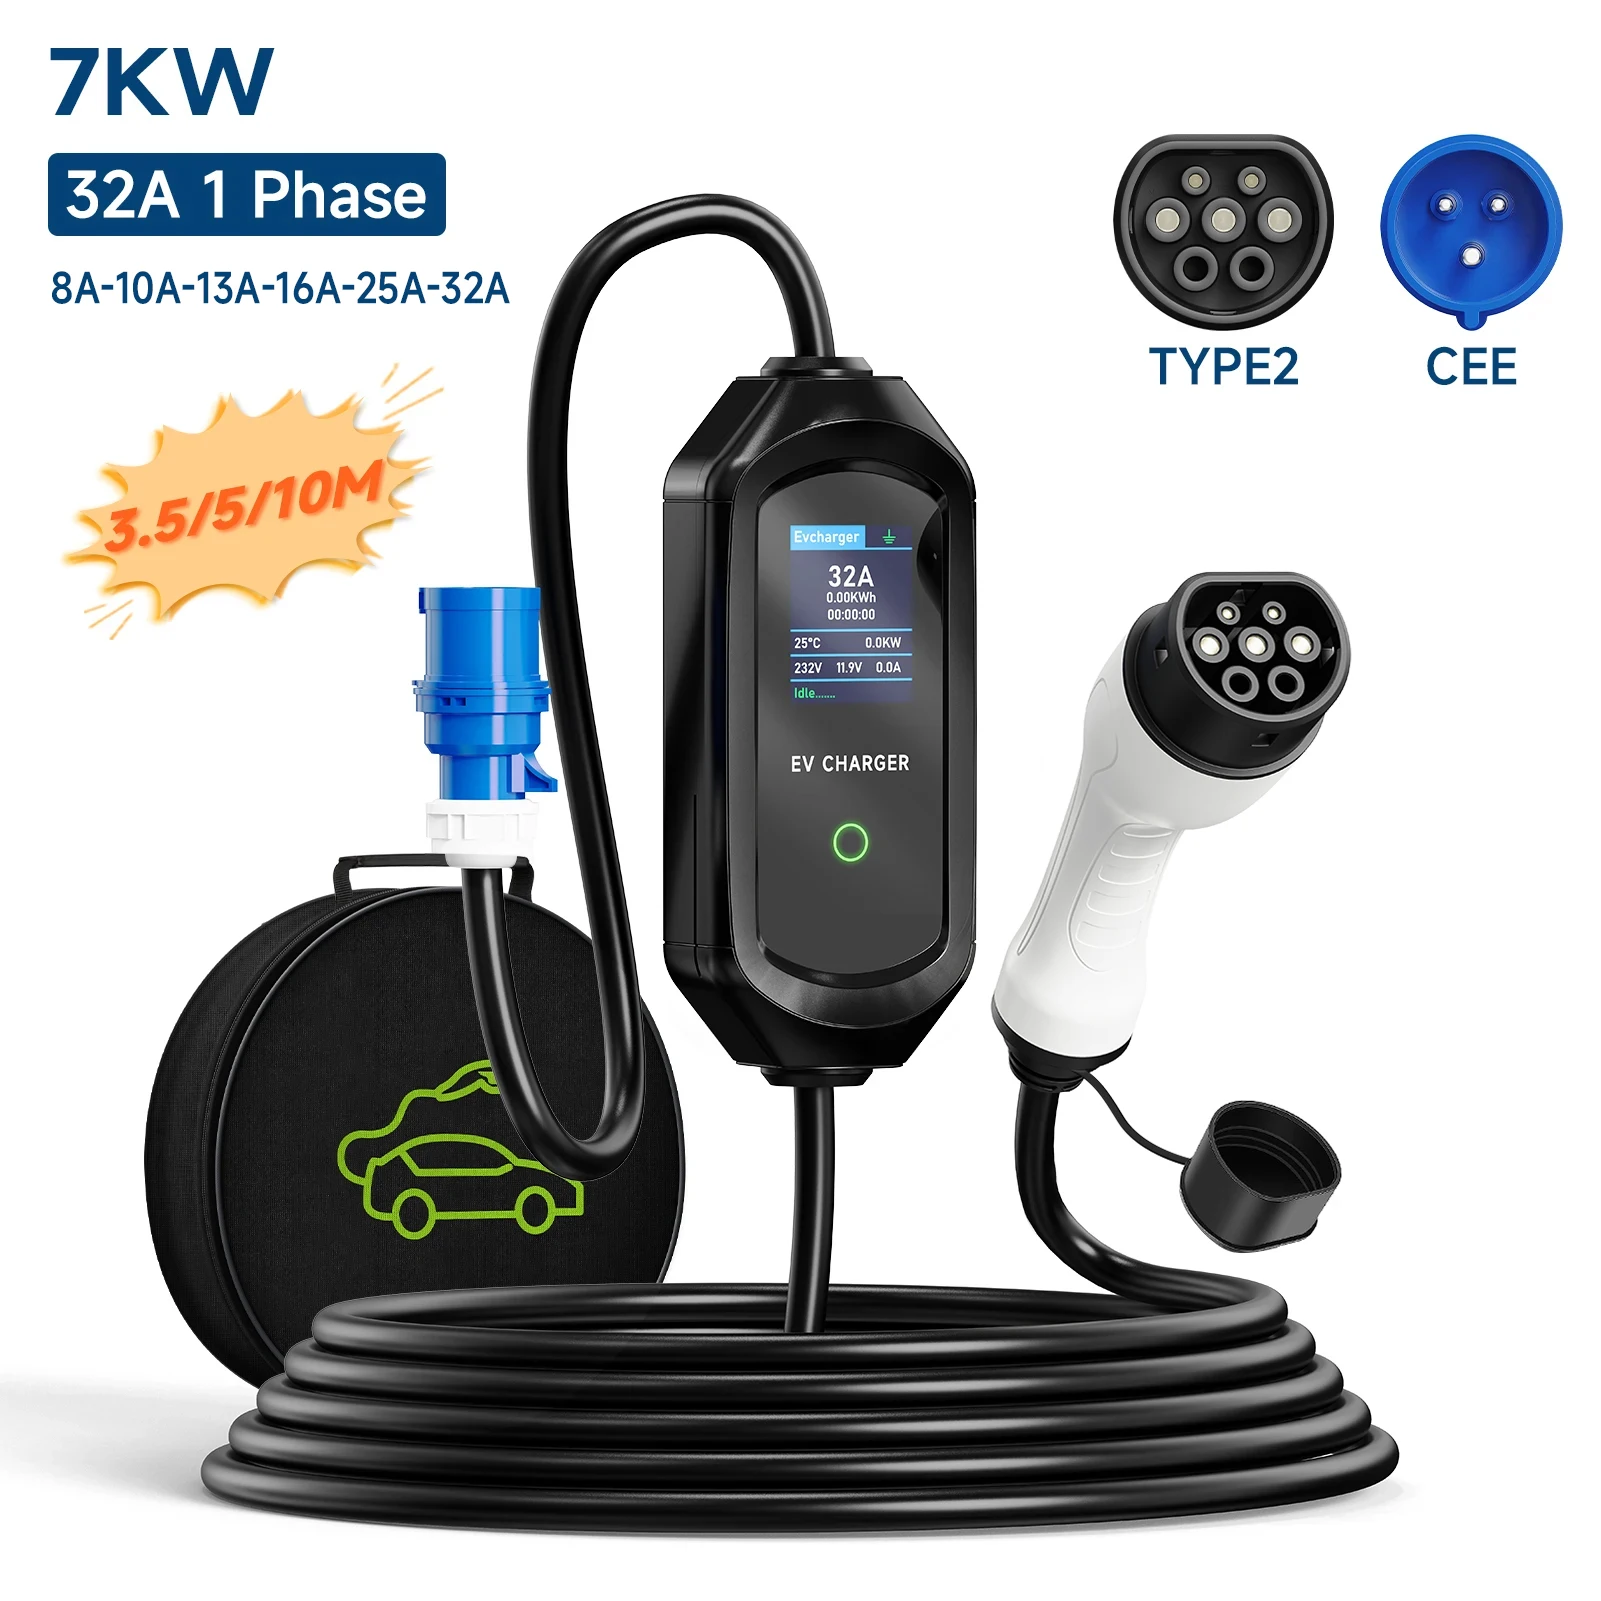 

Portable EV Charger Type2 IEC62196-2 Cable 32A 7KW with CEE Plug Type1 J1772 EVSE Charging Box GBT Wallbox for Electric Vehicle